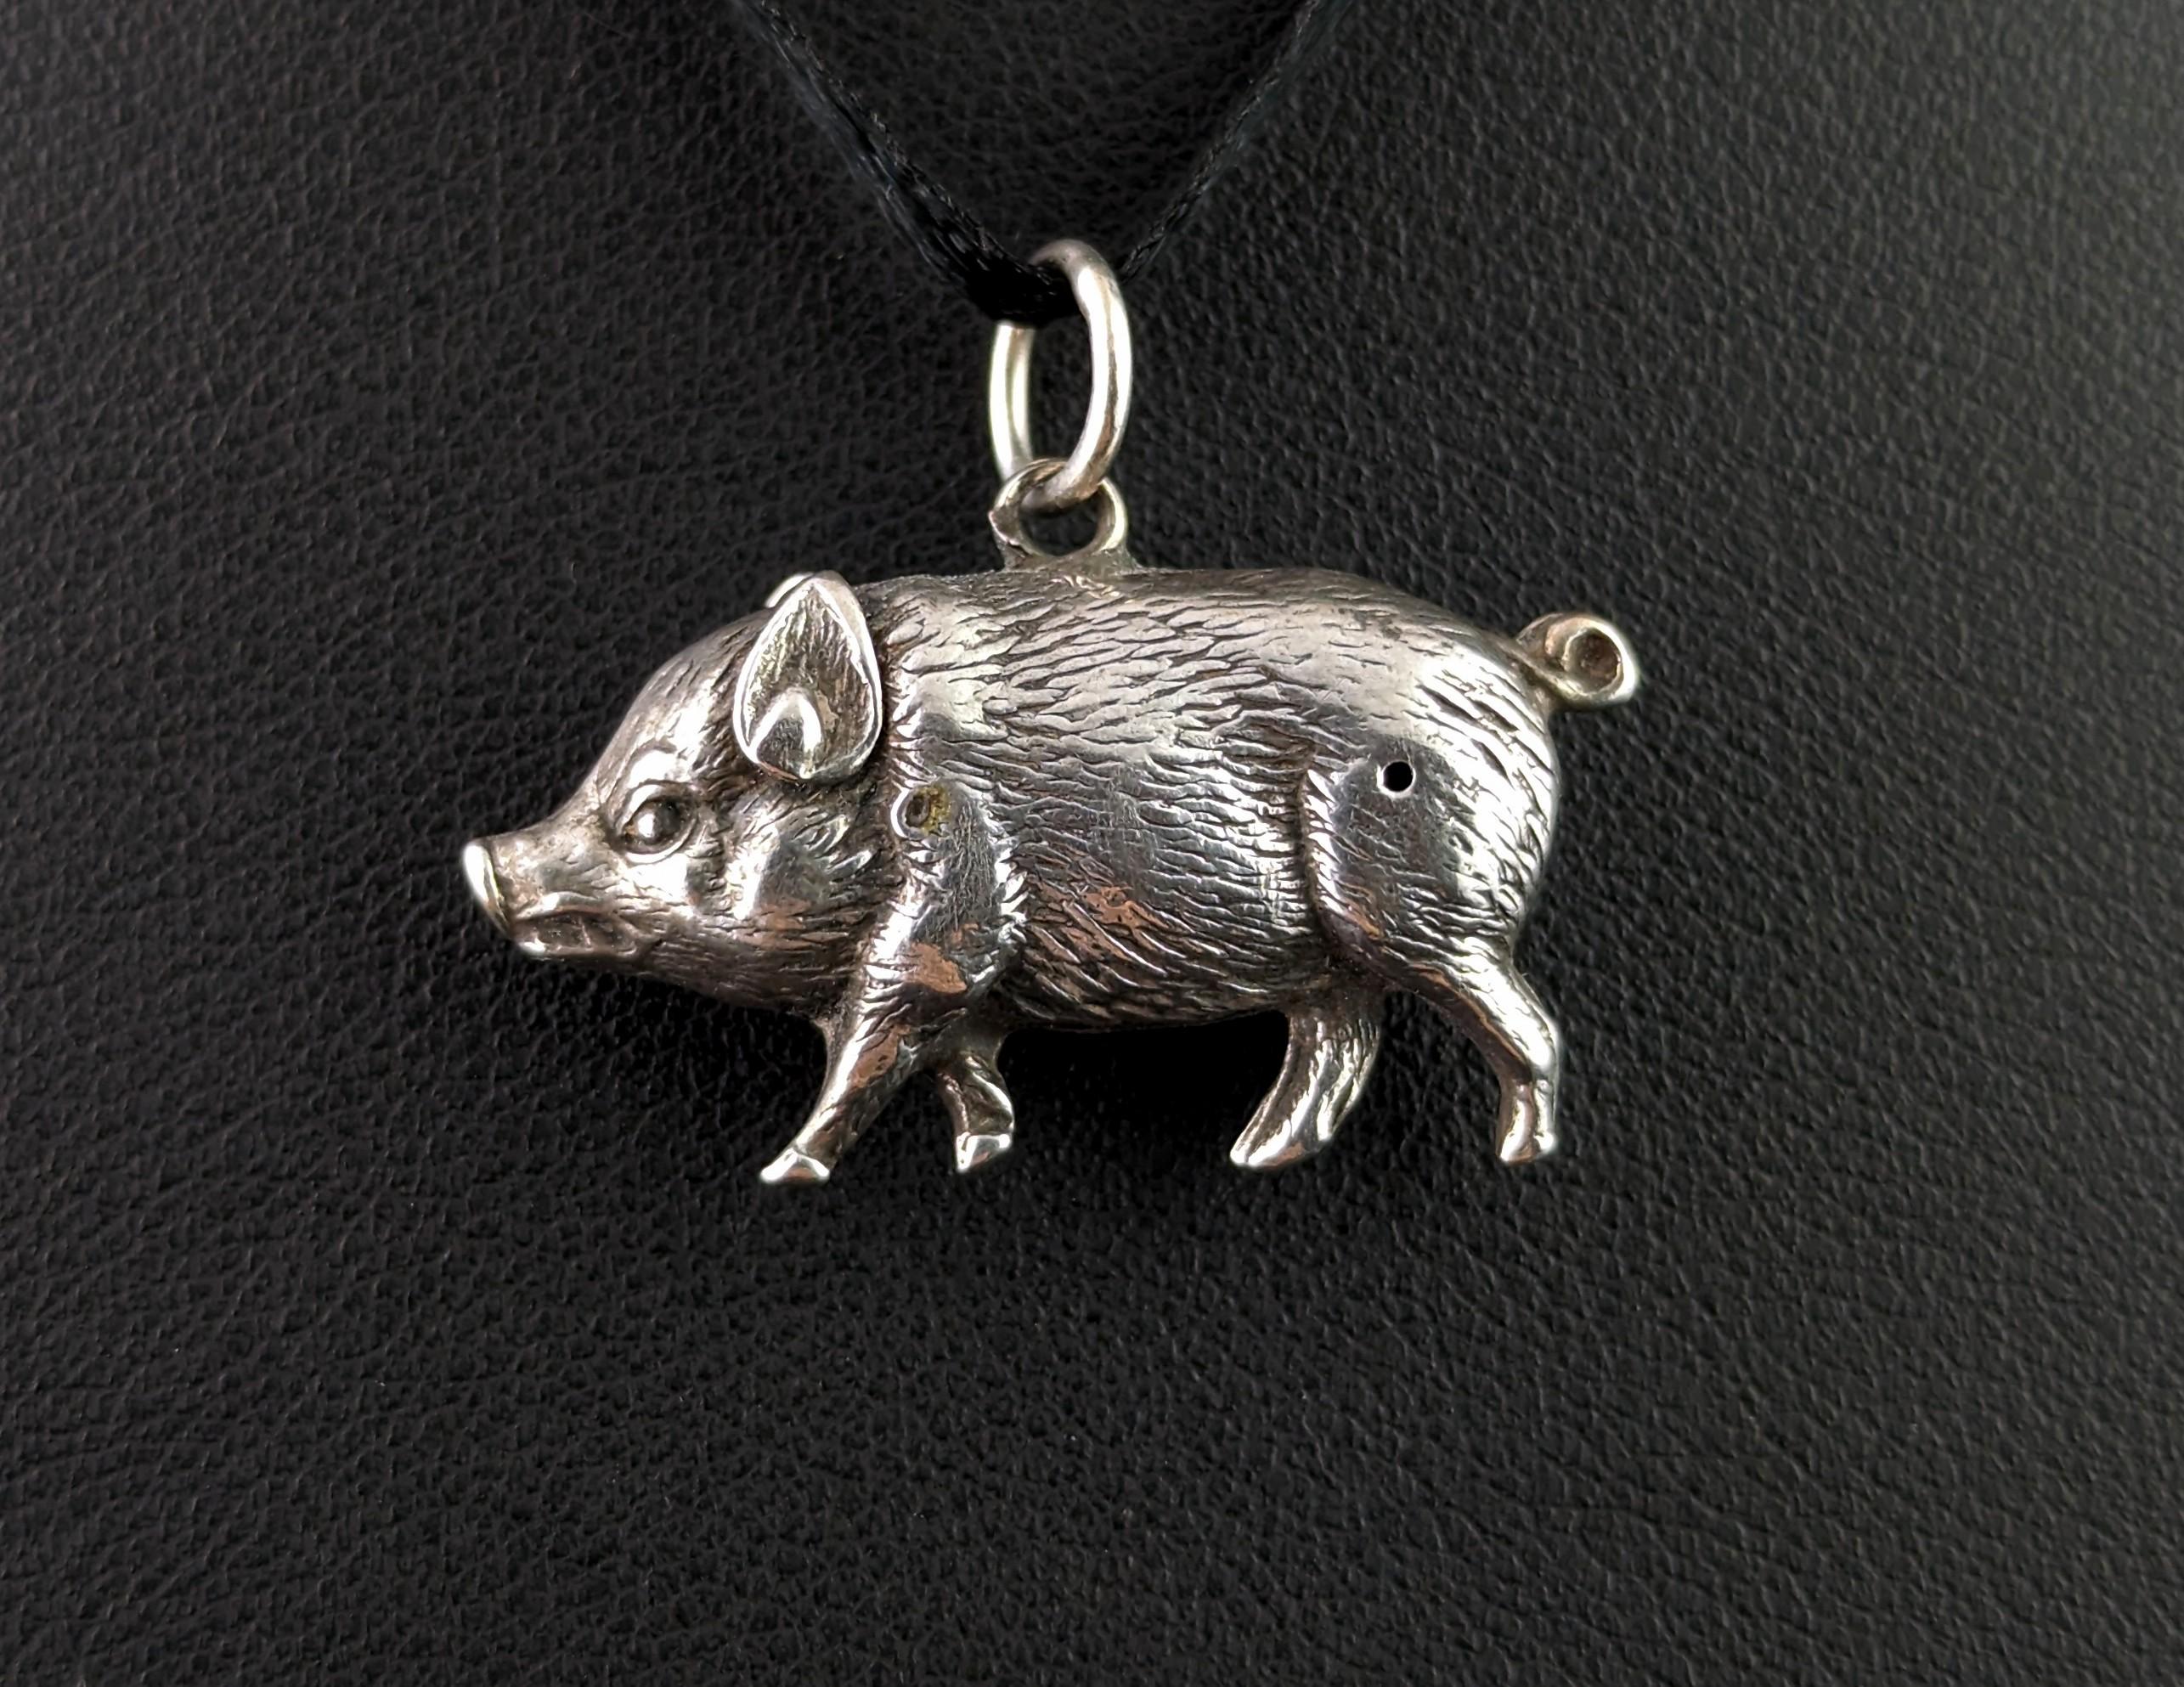 There are two sides to every Piggy! At least on this antique silver lucky pig pendant there are.

I have to admit I really love the character of this piece!

It is a chunky little sterling silver piggy with an integral silver jump ring bale making